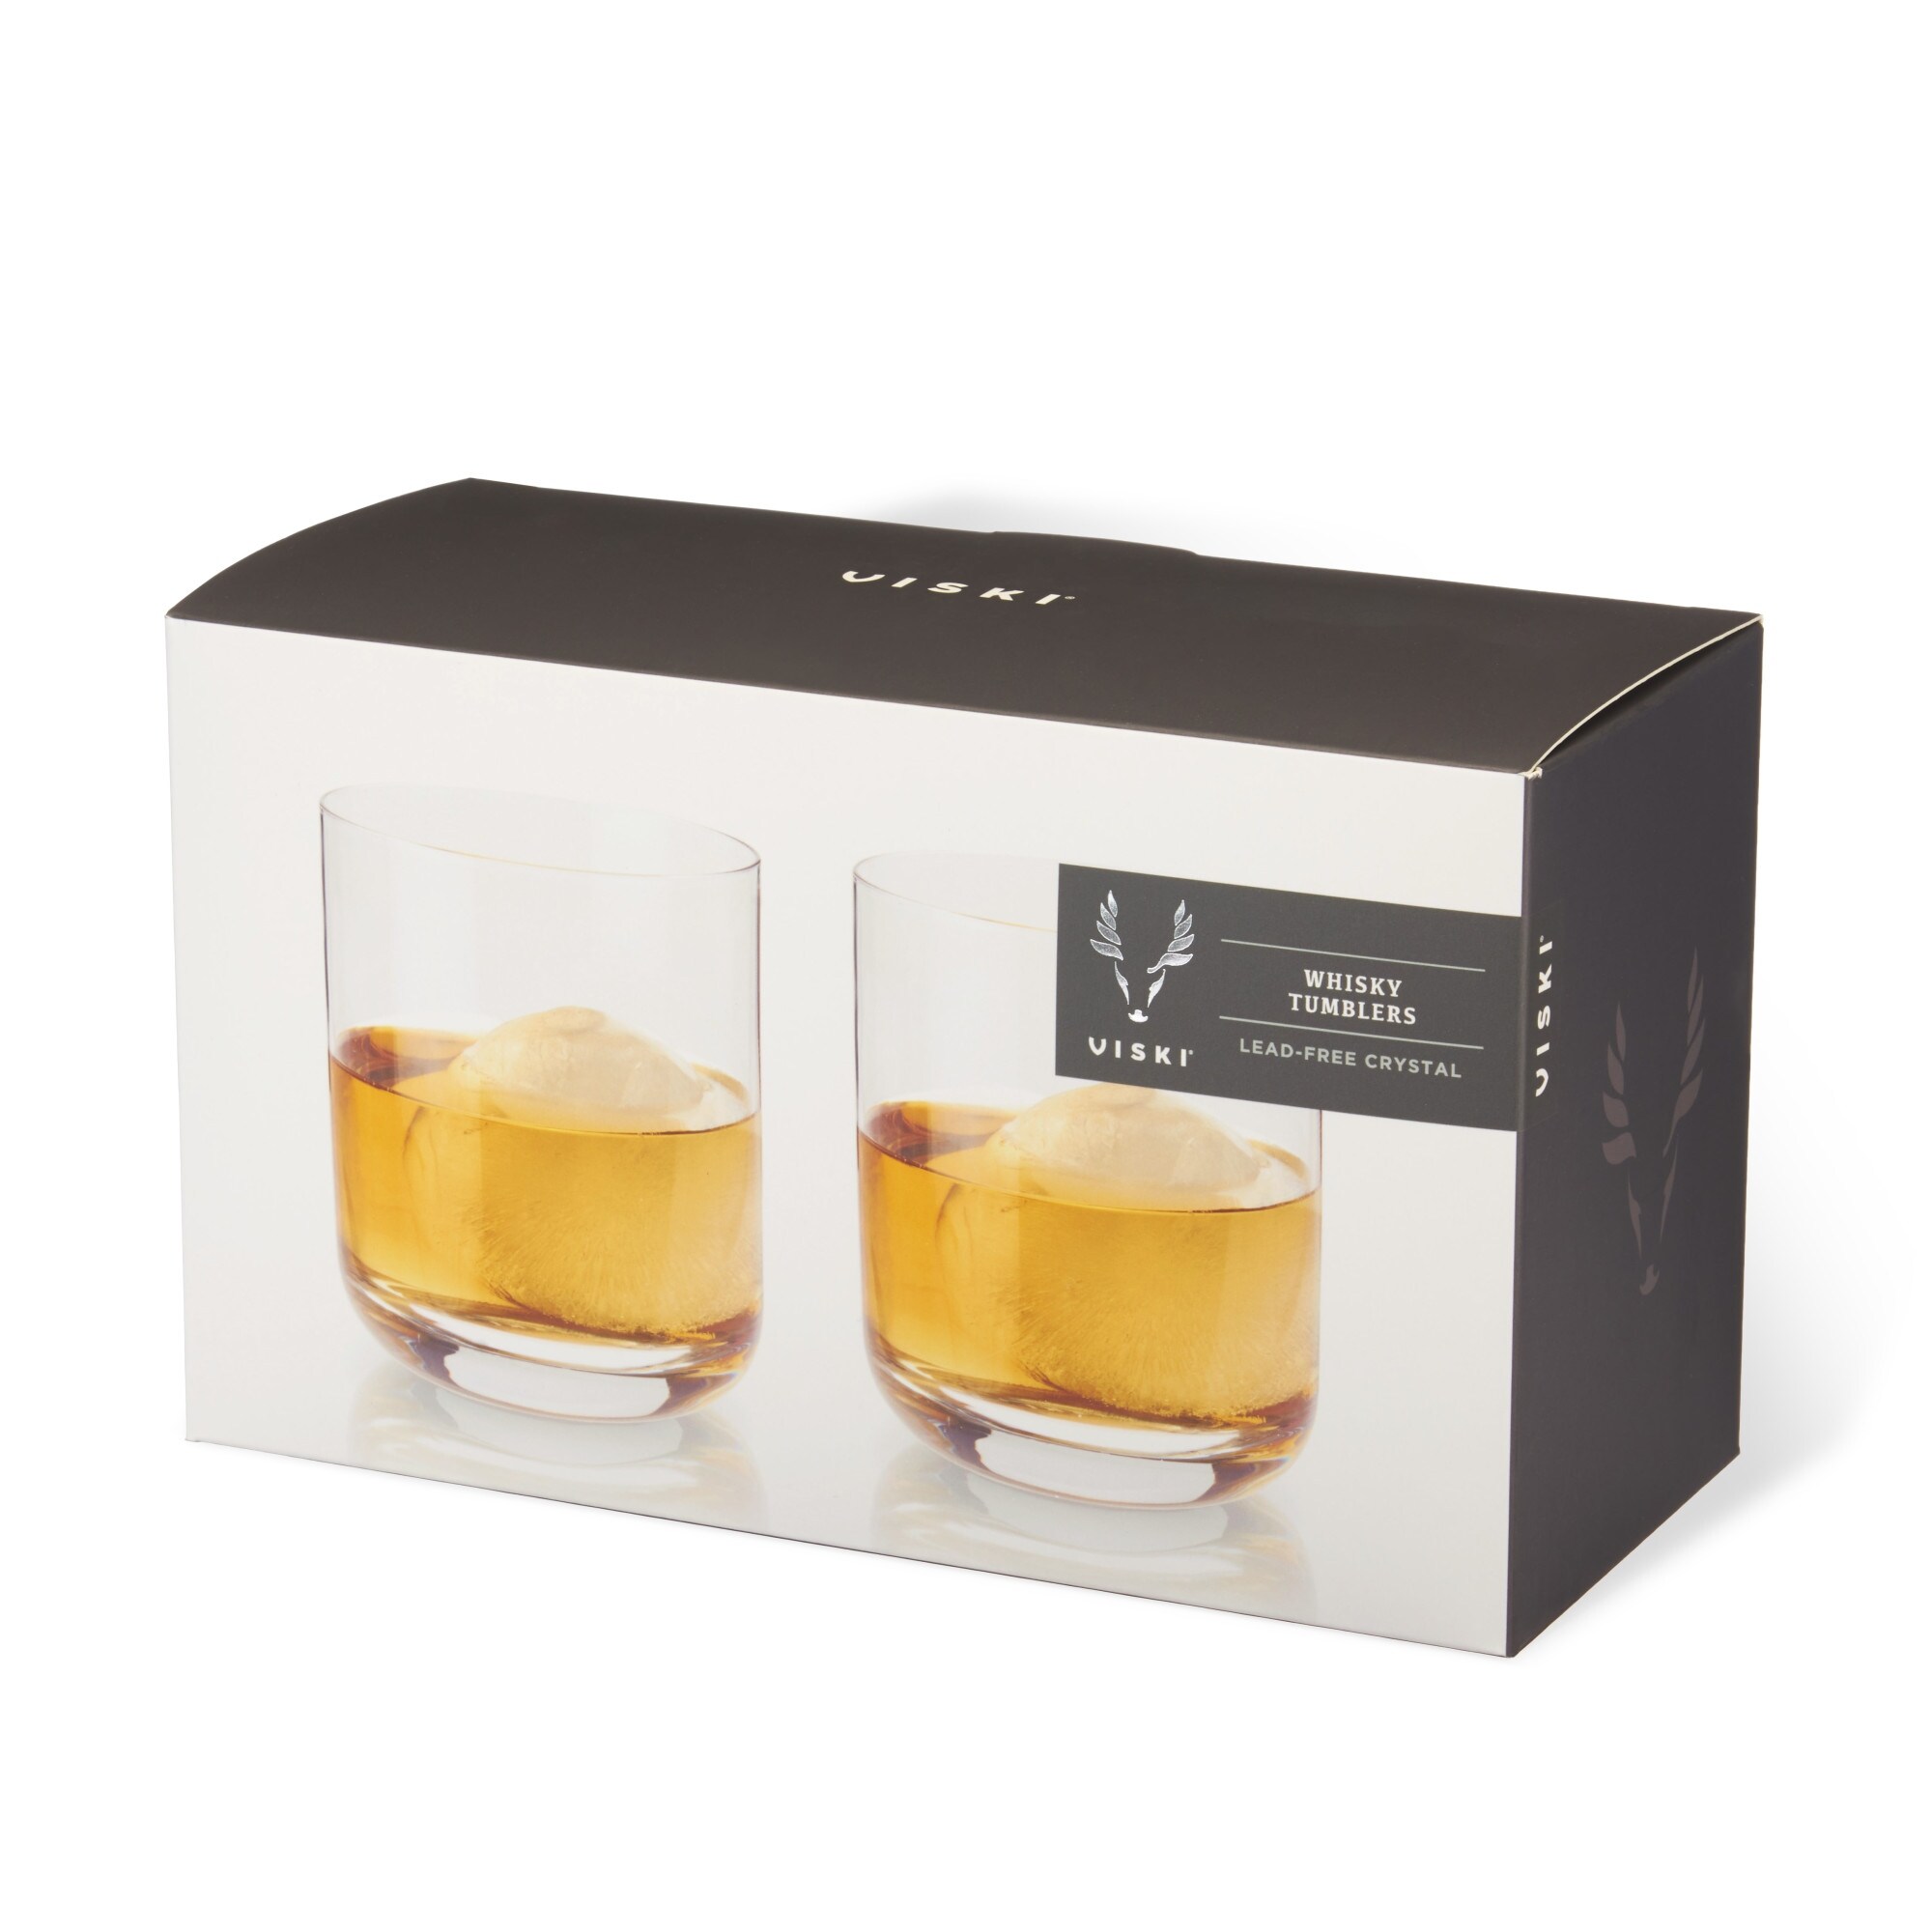 https://ak1.ostkcdn.com/images/products/is/images/direct/2277757e46e489c9005399913590890b669ccccb/Crystal-Whiskey-Tumblers-by-Viski.jpg